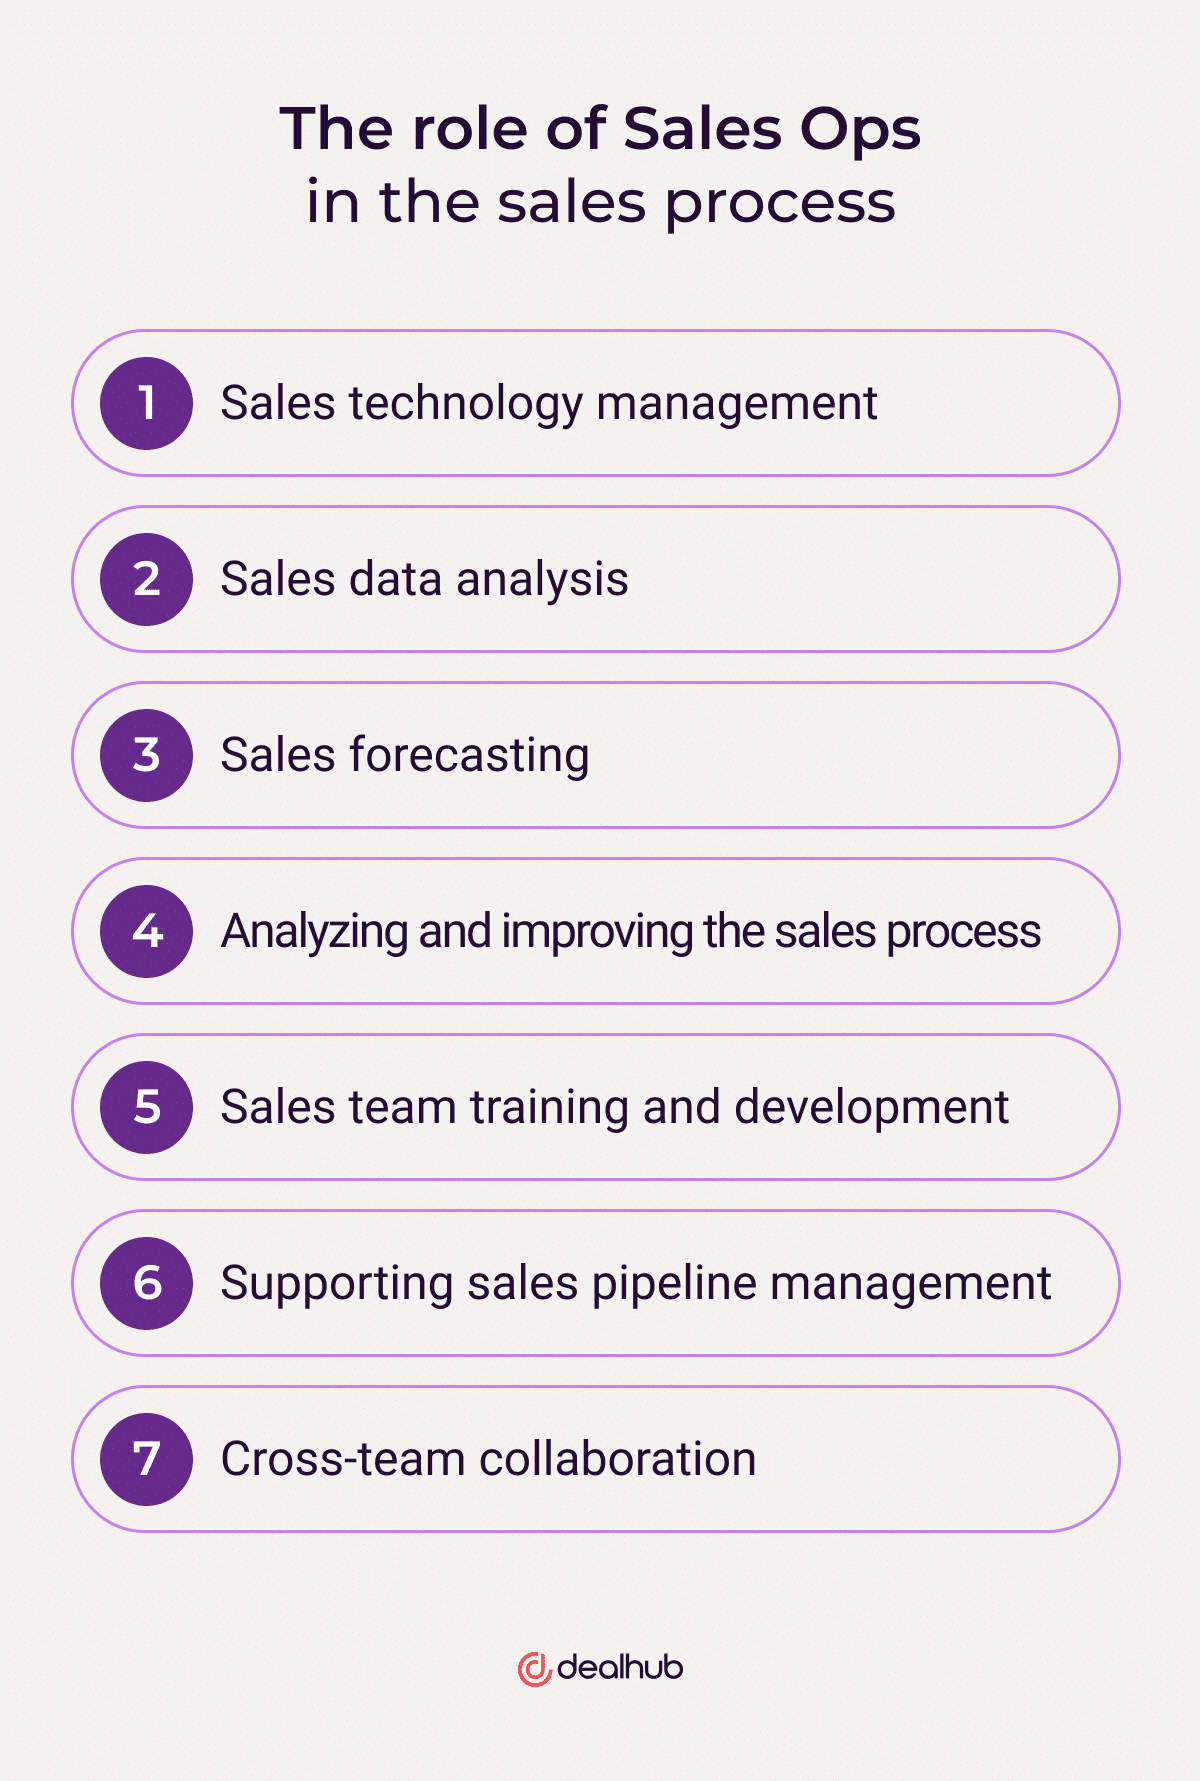 The role of Sales Ops